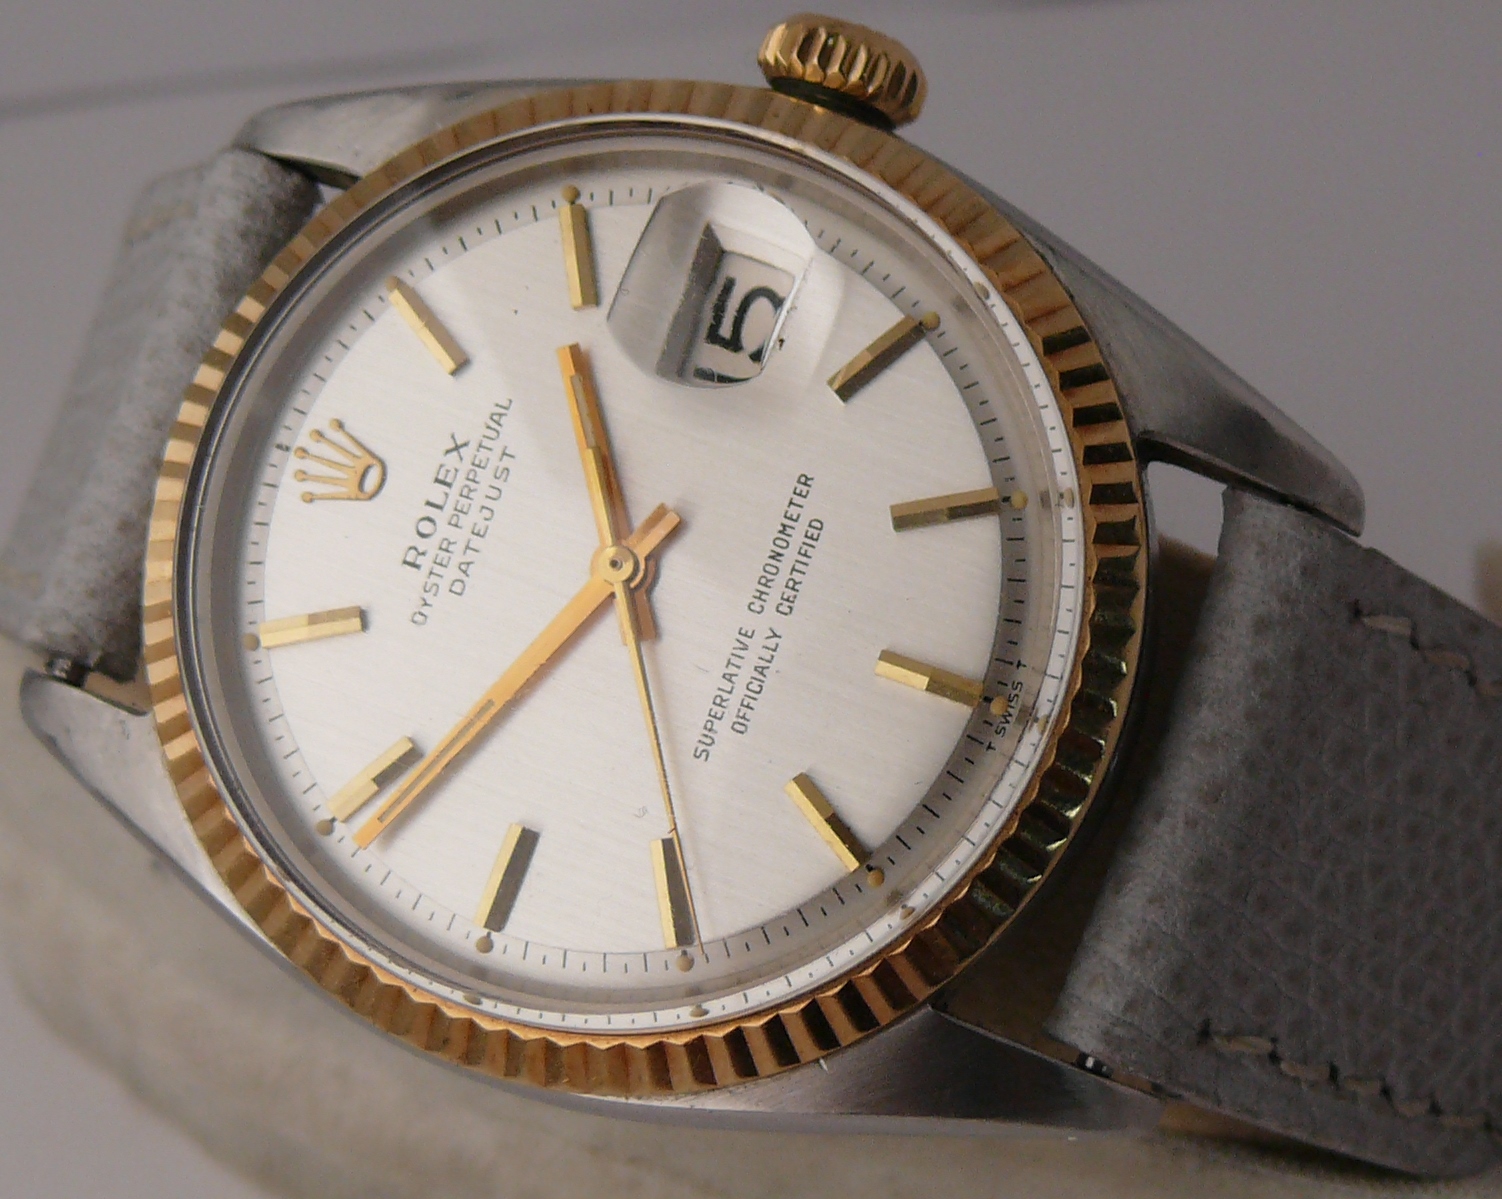 1966 Vintage Rolex Datejust 1601, all numbers are legible between lugs. Serial 1.3m dates this to